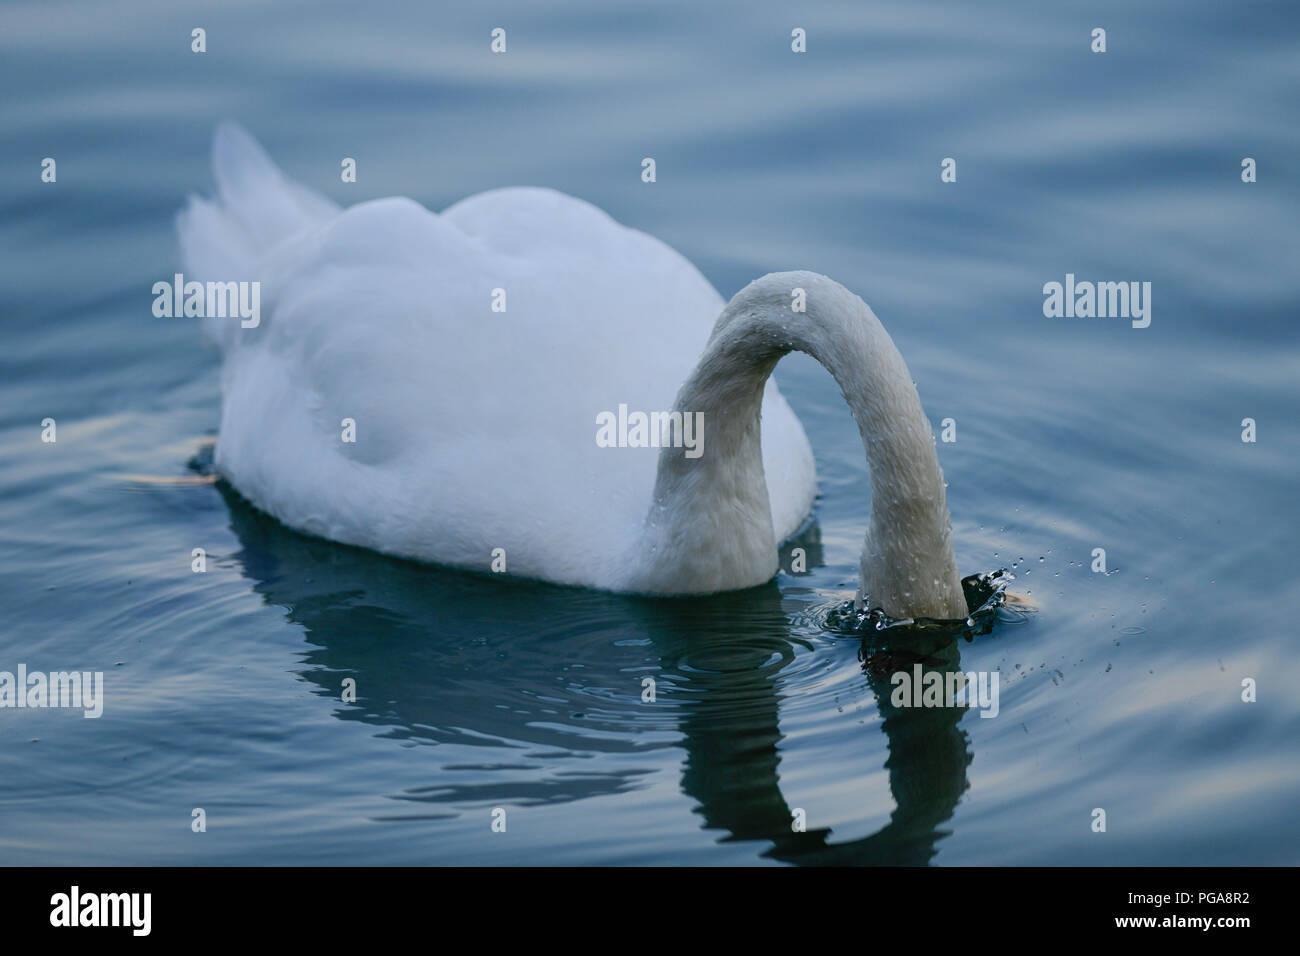 Mute swan (Cygnus olor) dives into the water, Germany Stock Photo